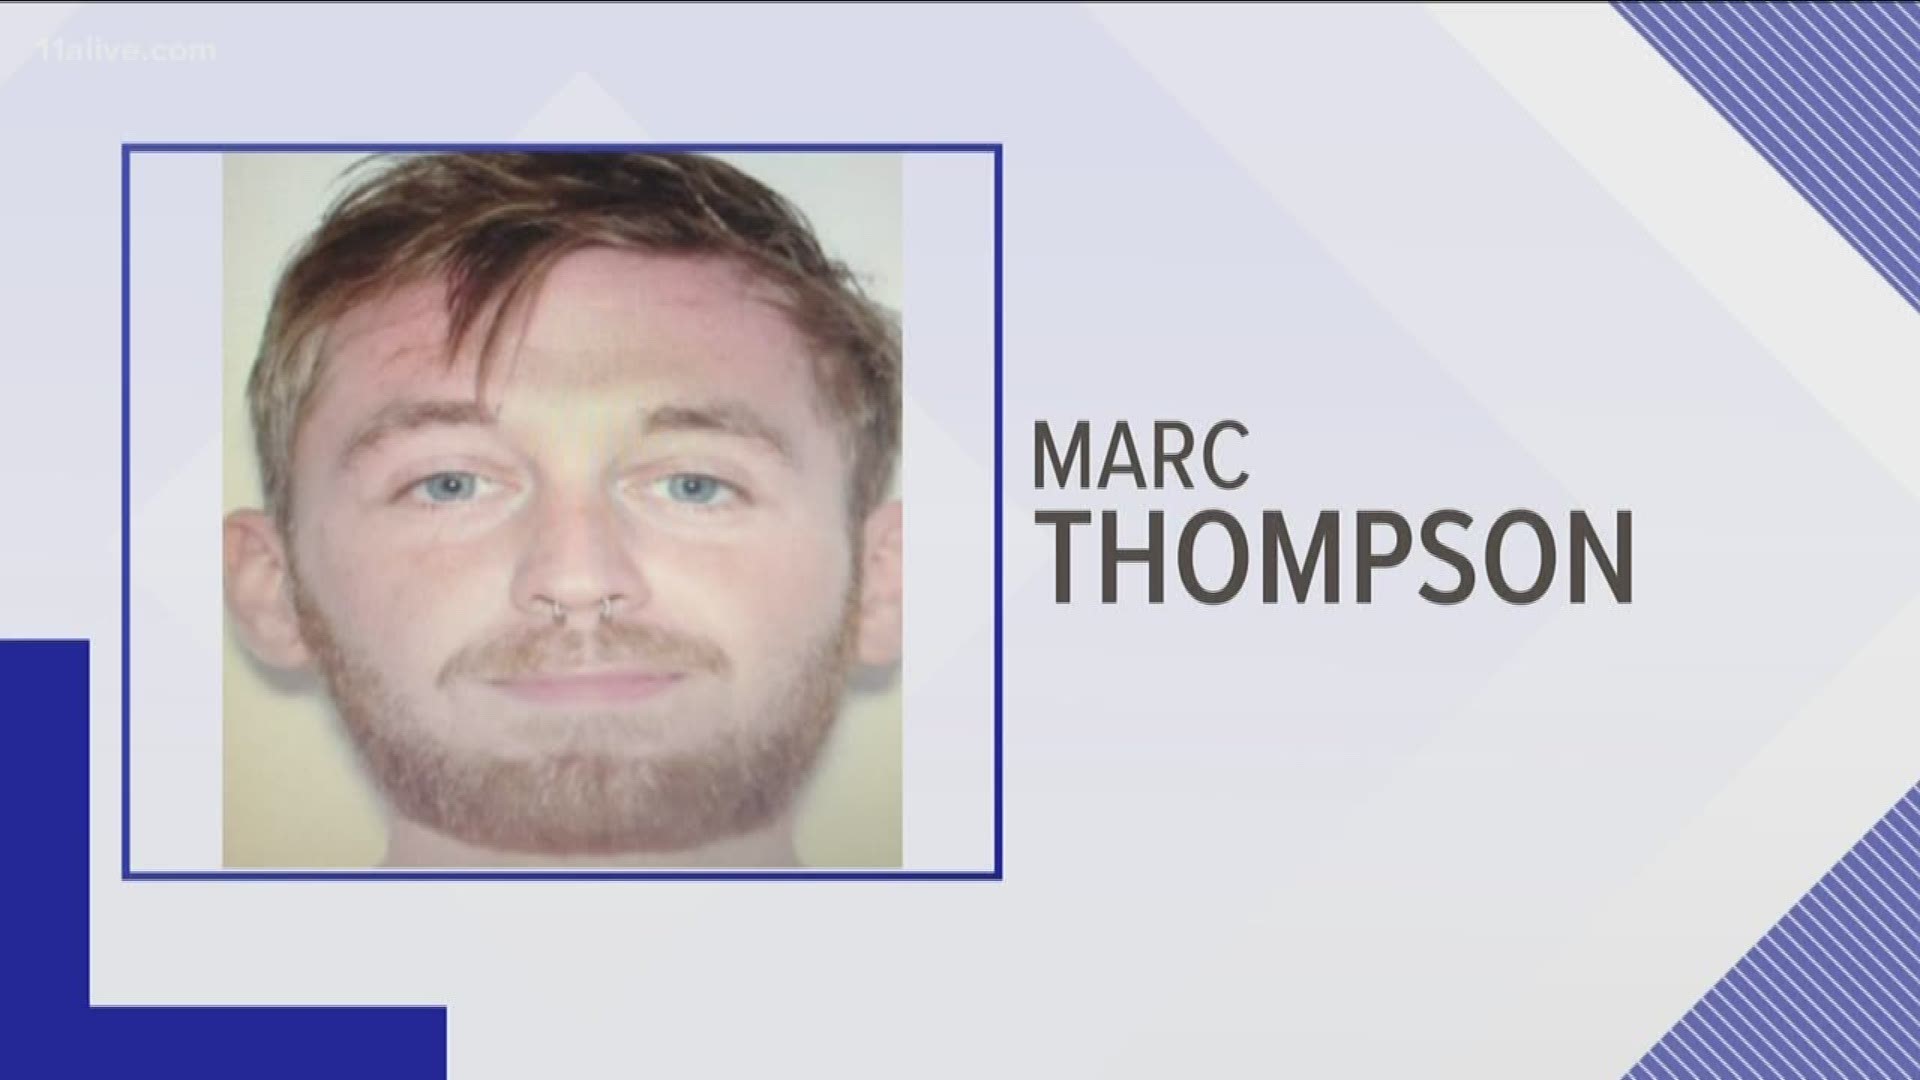 Investigators say Marc Thompson is accused of pointing a gun at his mother's head while holding her and his brother hostage.